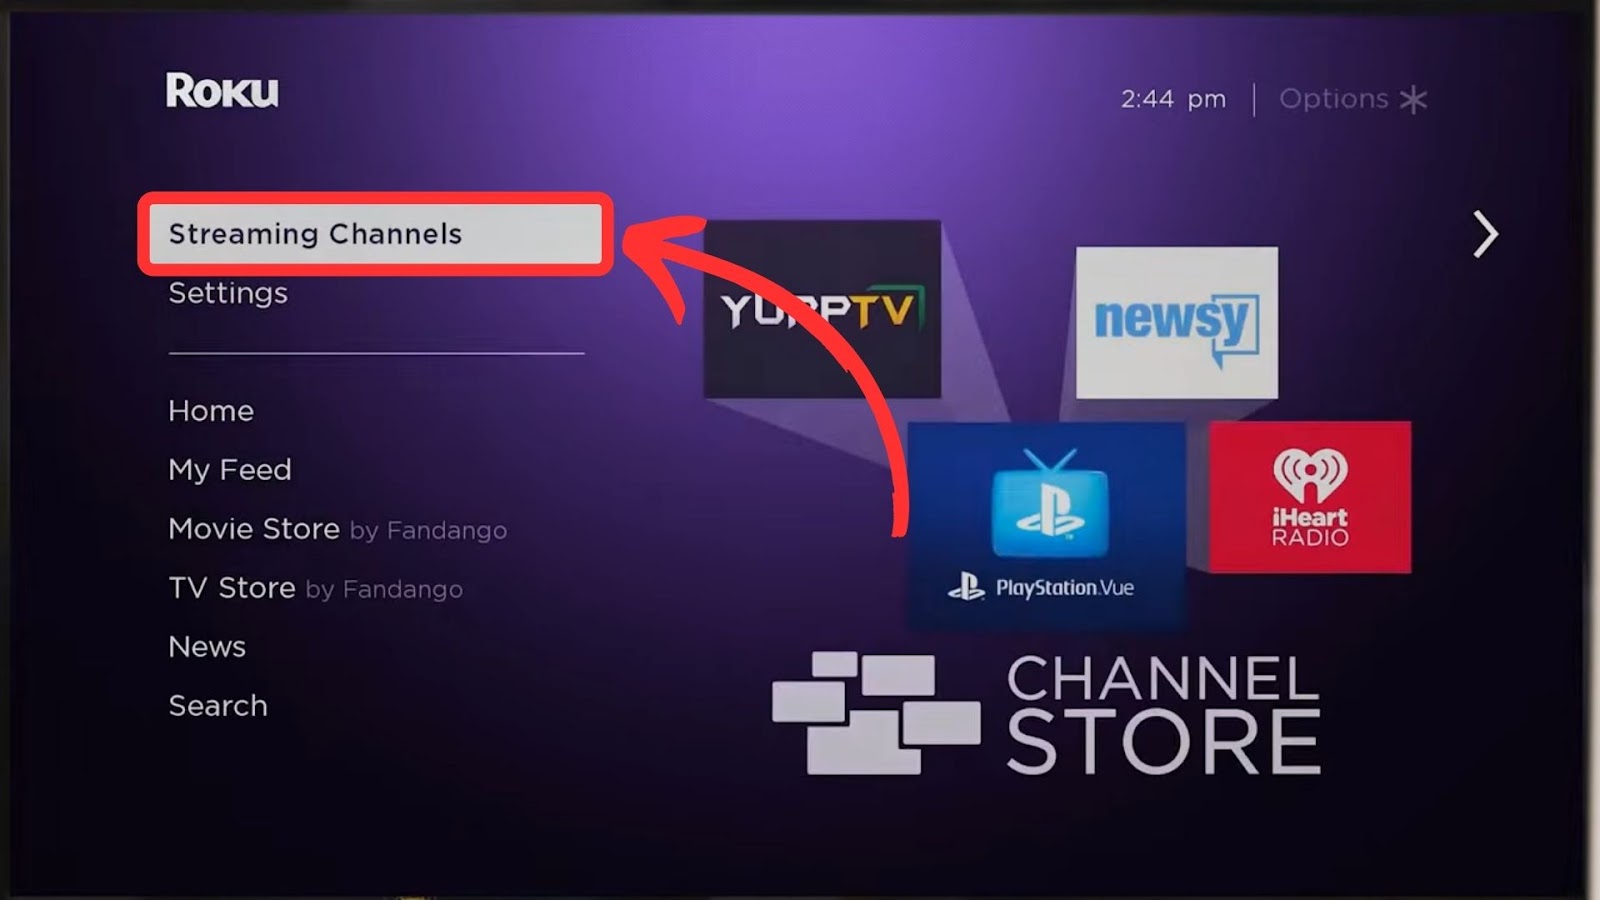 Access Roku Streaming channels Section